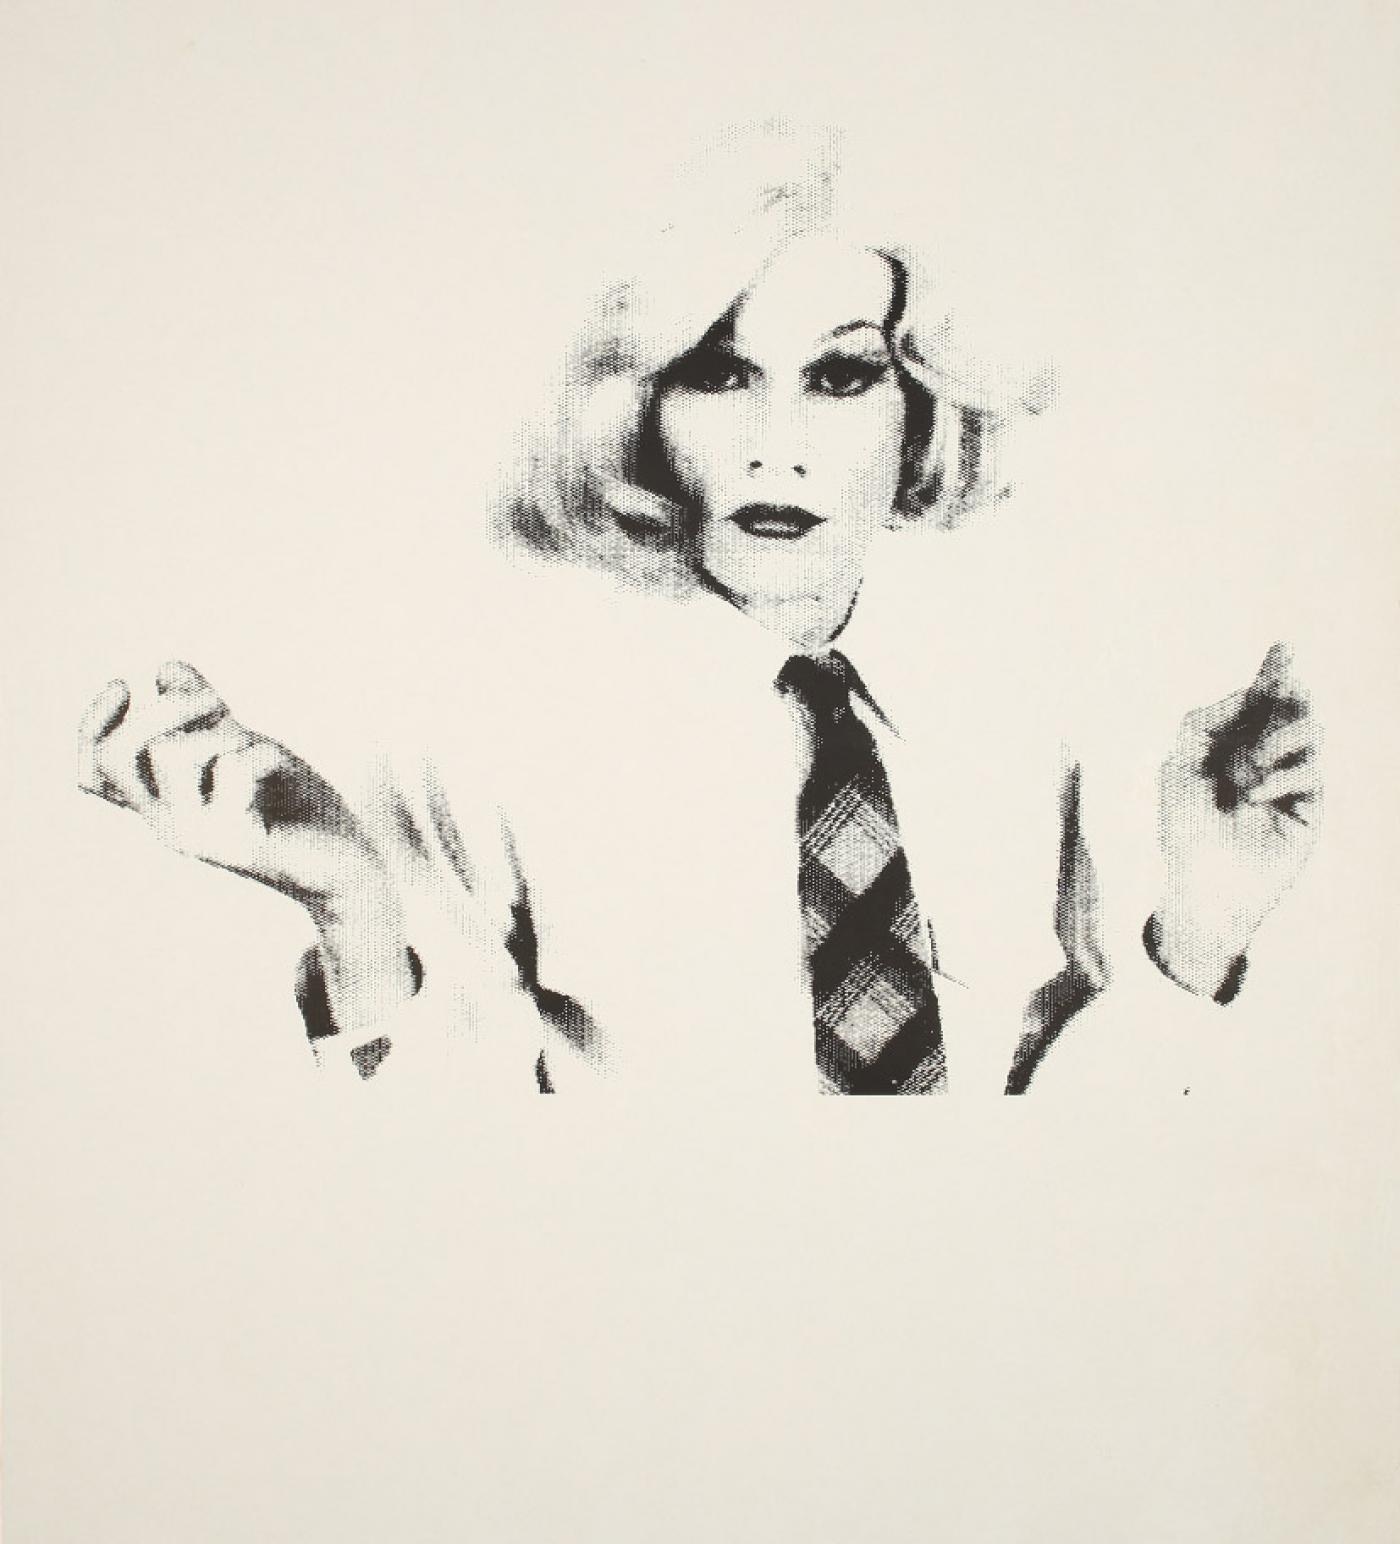 Andy Warhol - Andy in drag (wallpaper), 1980